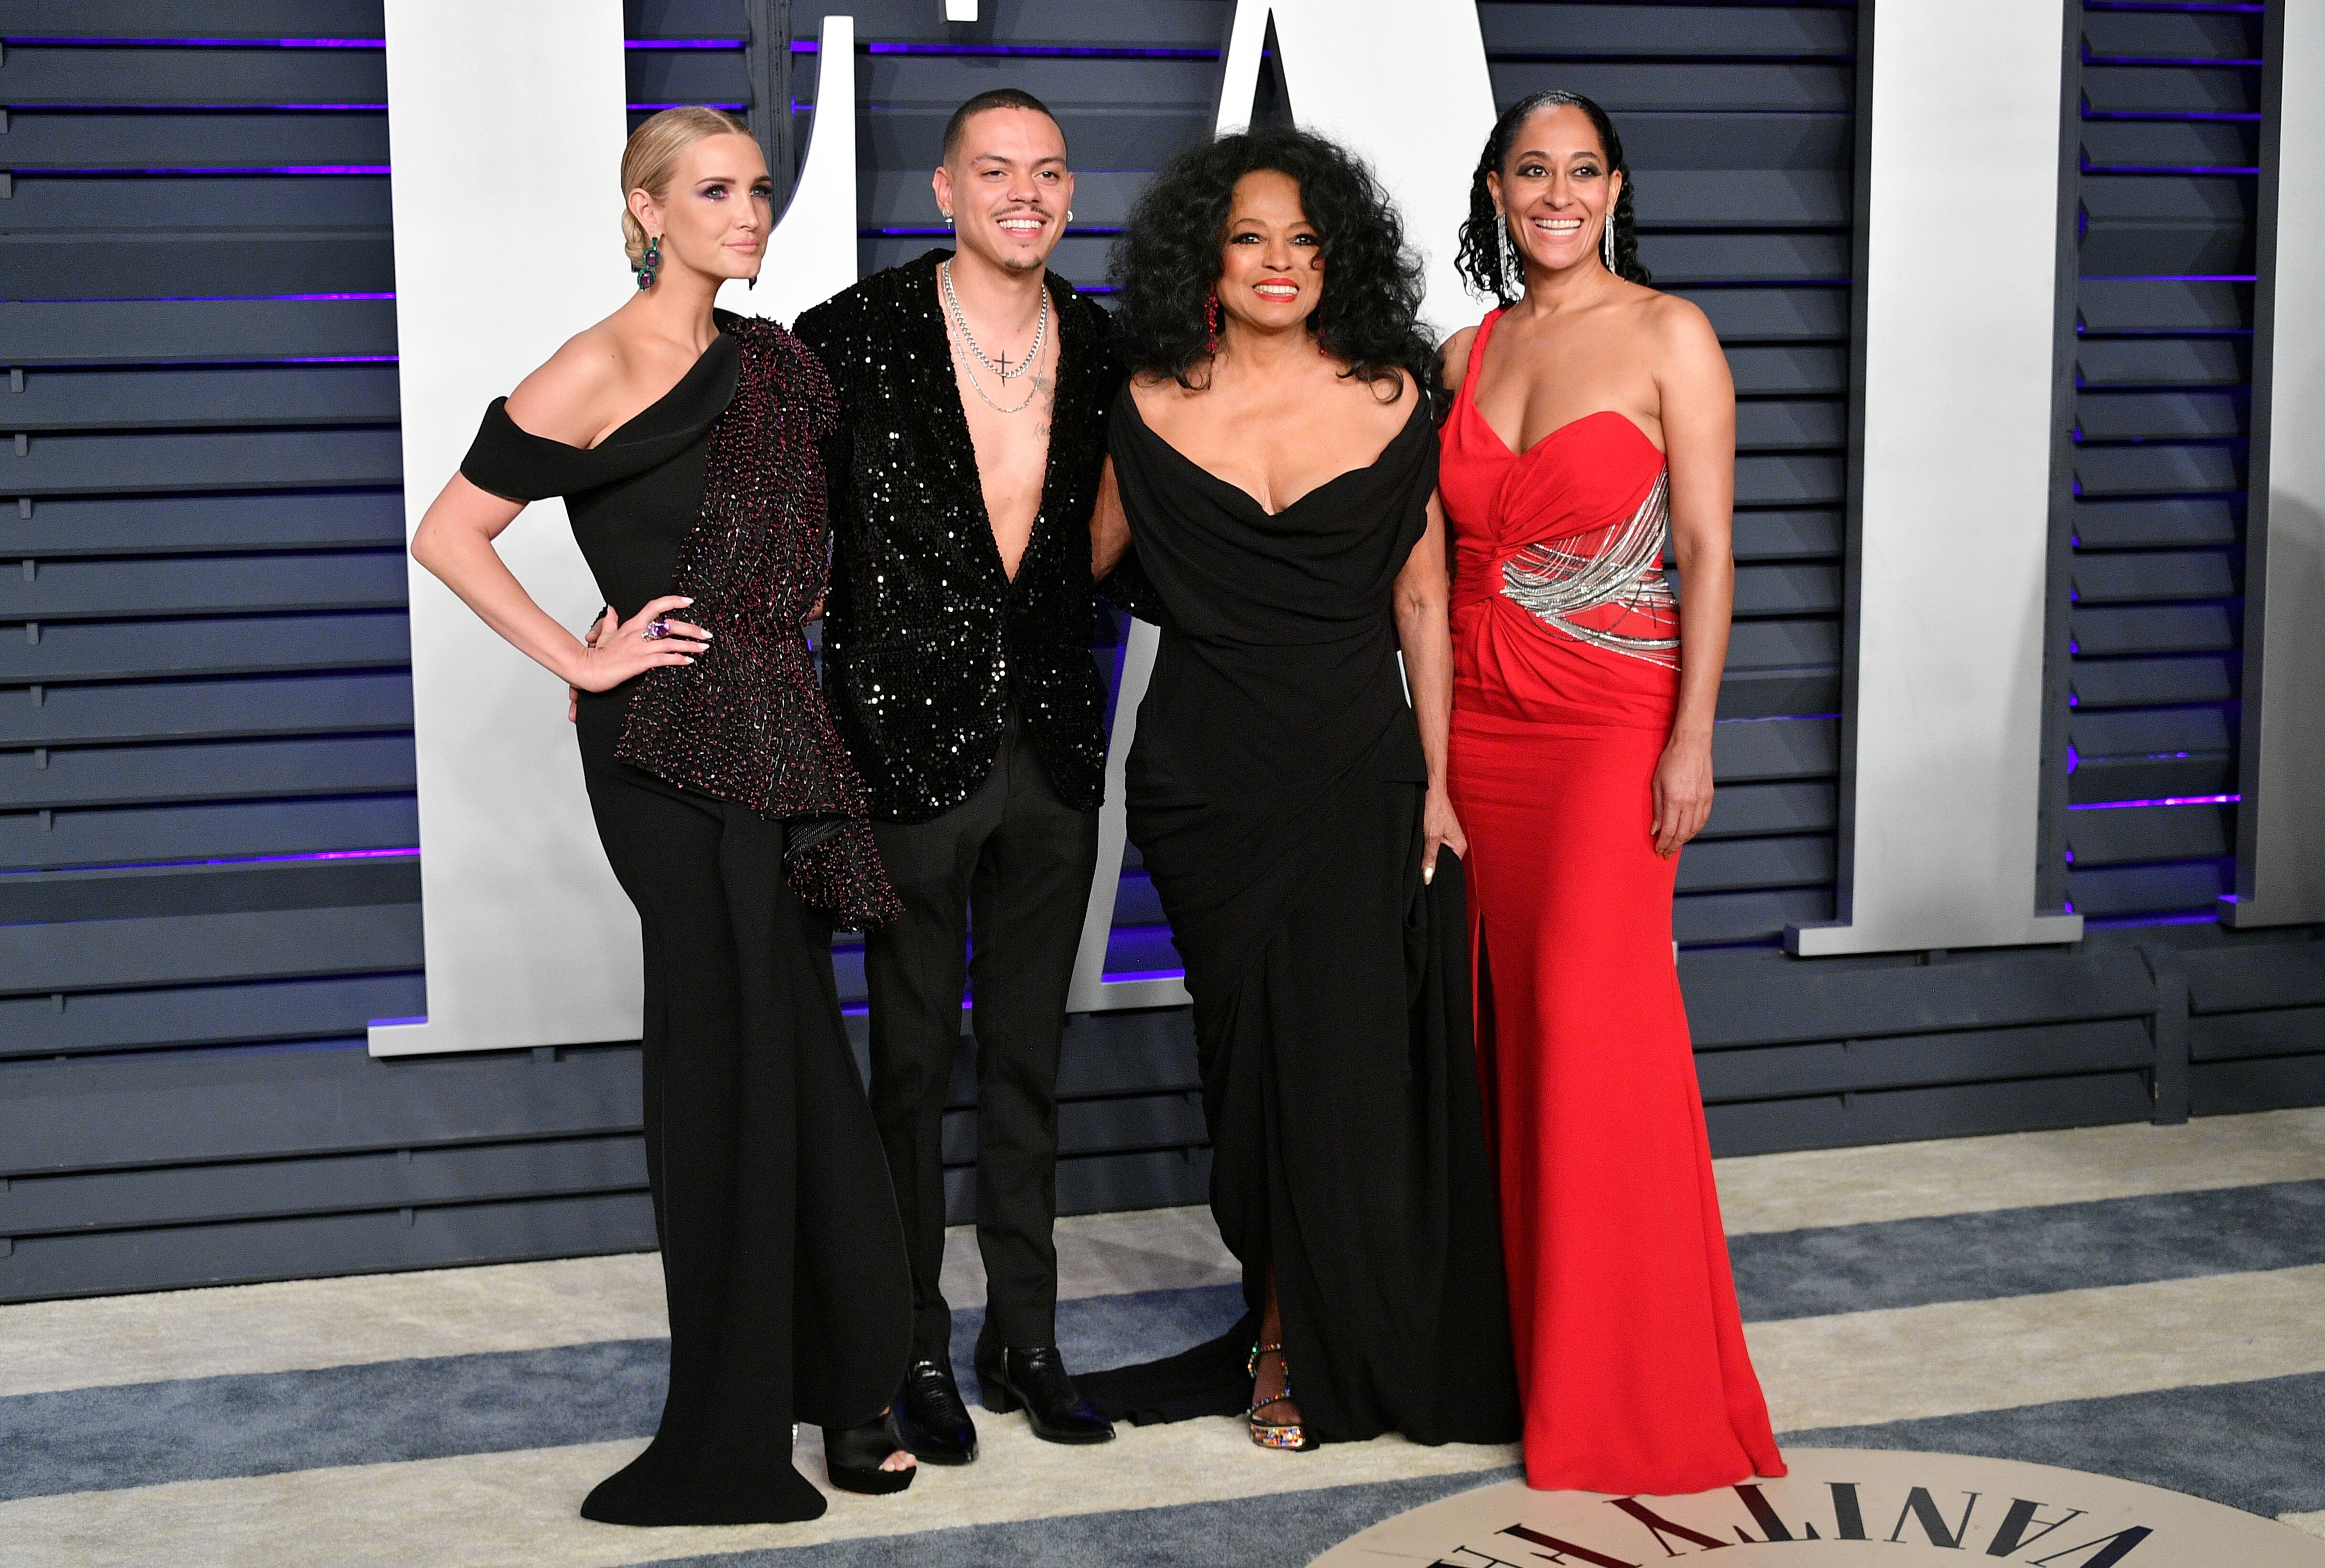 Diana Ross and her children attend a Vanity Fair event | Source: Getty Images/GlobalImagesUkraine